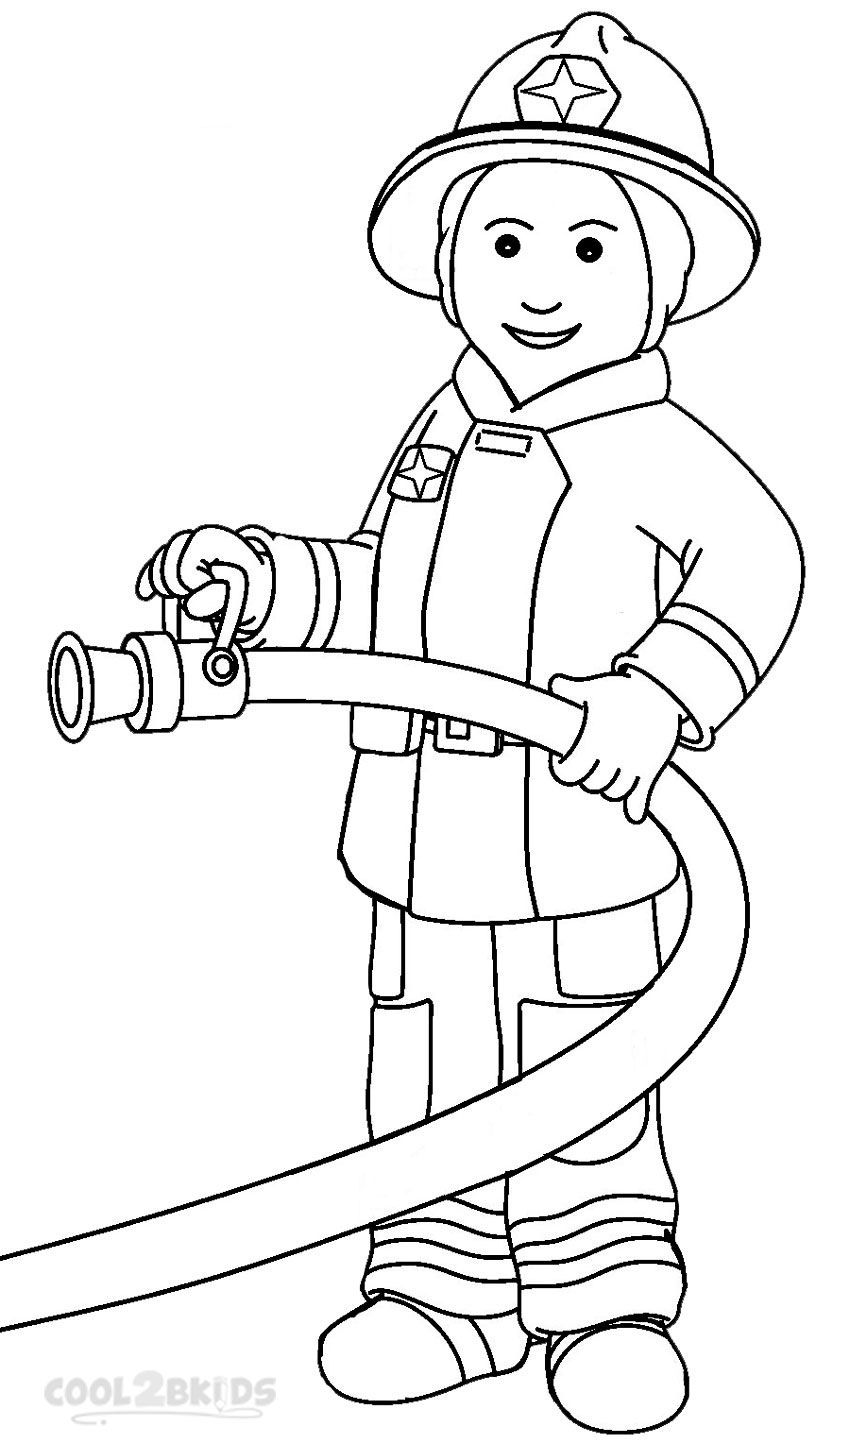 Free printable fireman coloring pages coolbkids munity helpers preschool preschool coloring pages coloring pages